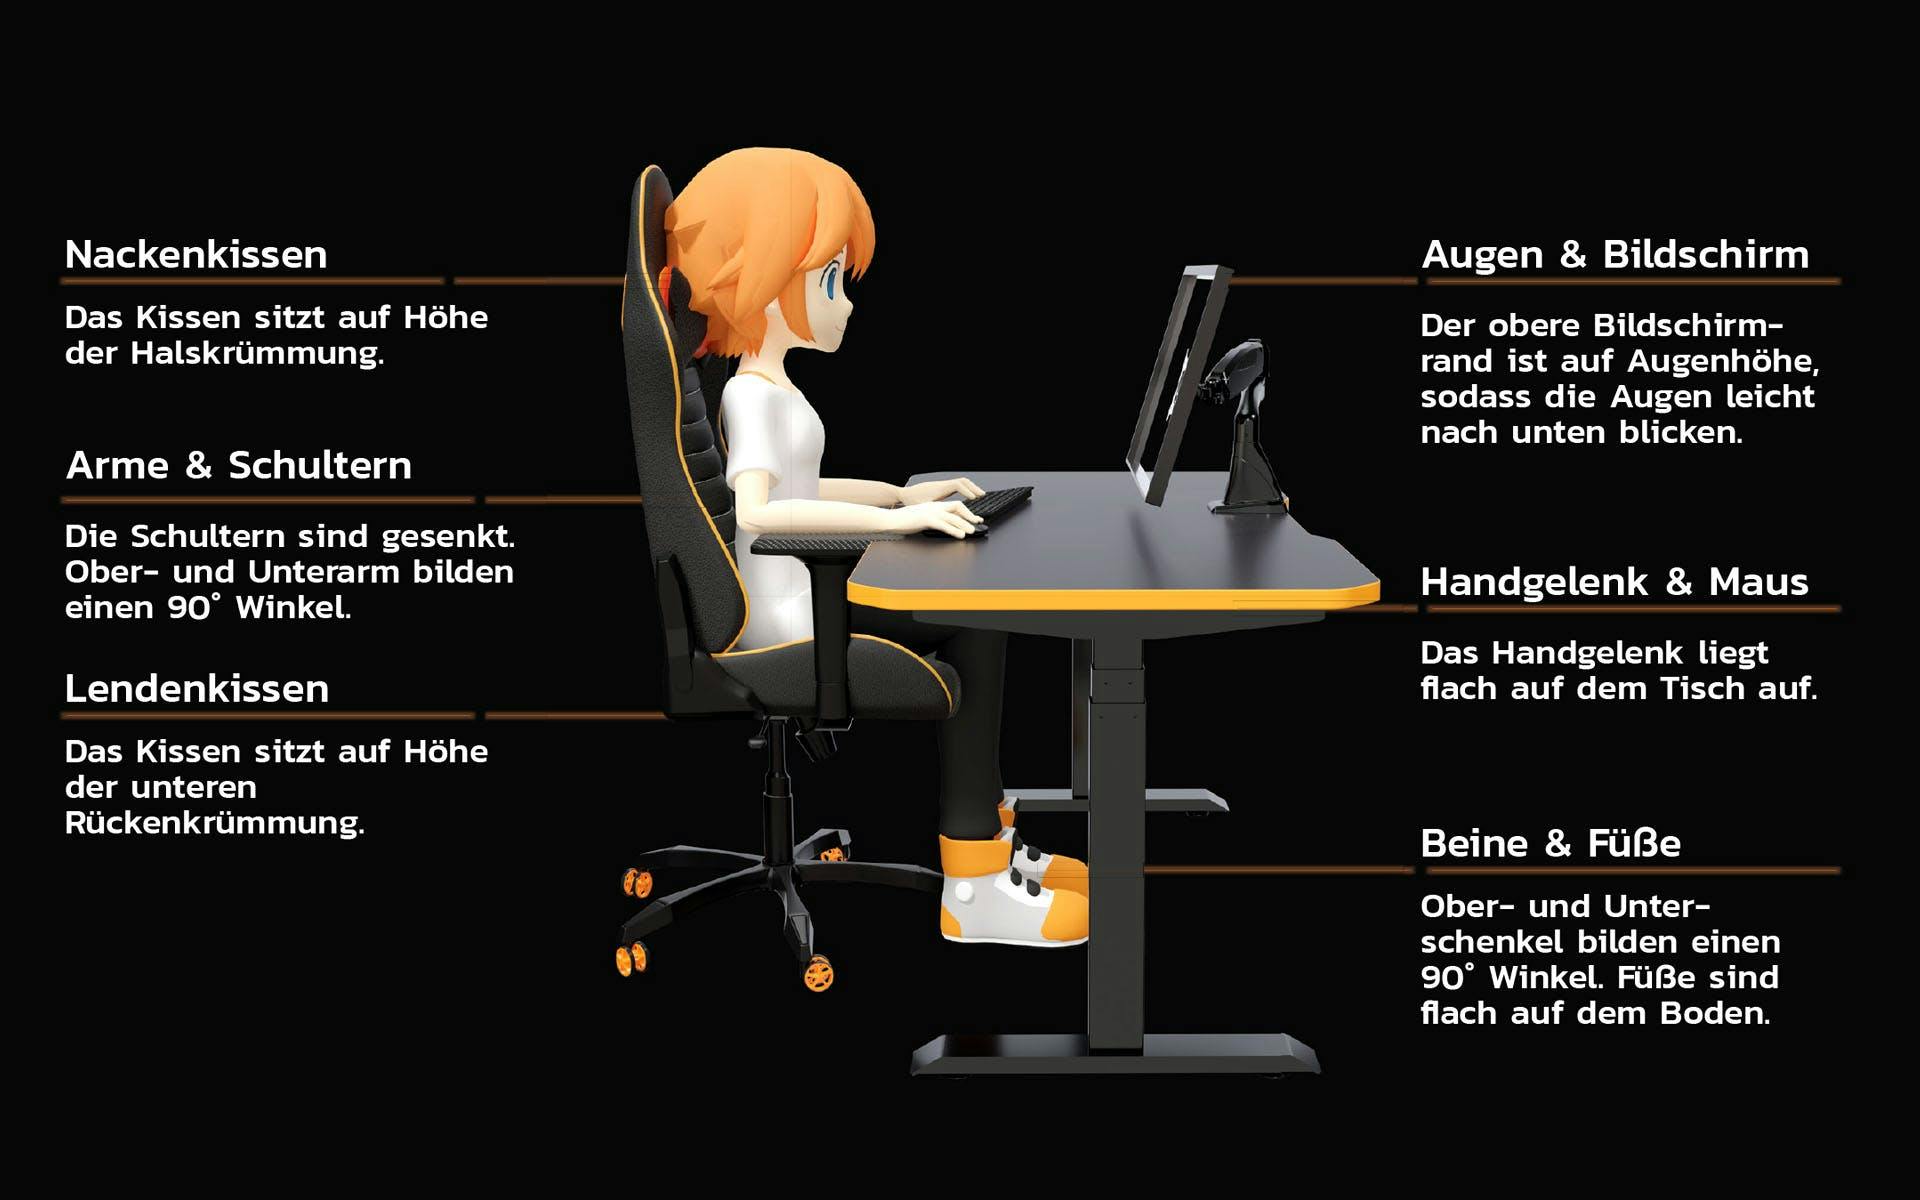 Tips for a proper sitting position with the ideal desk height